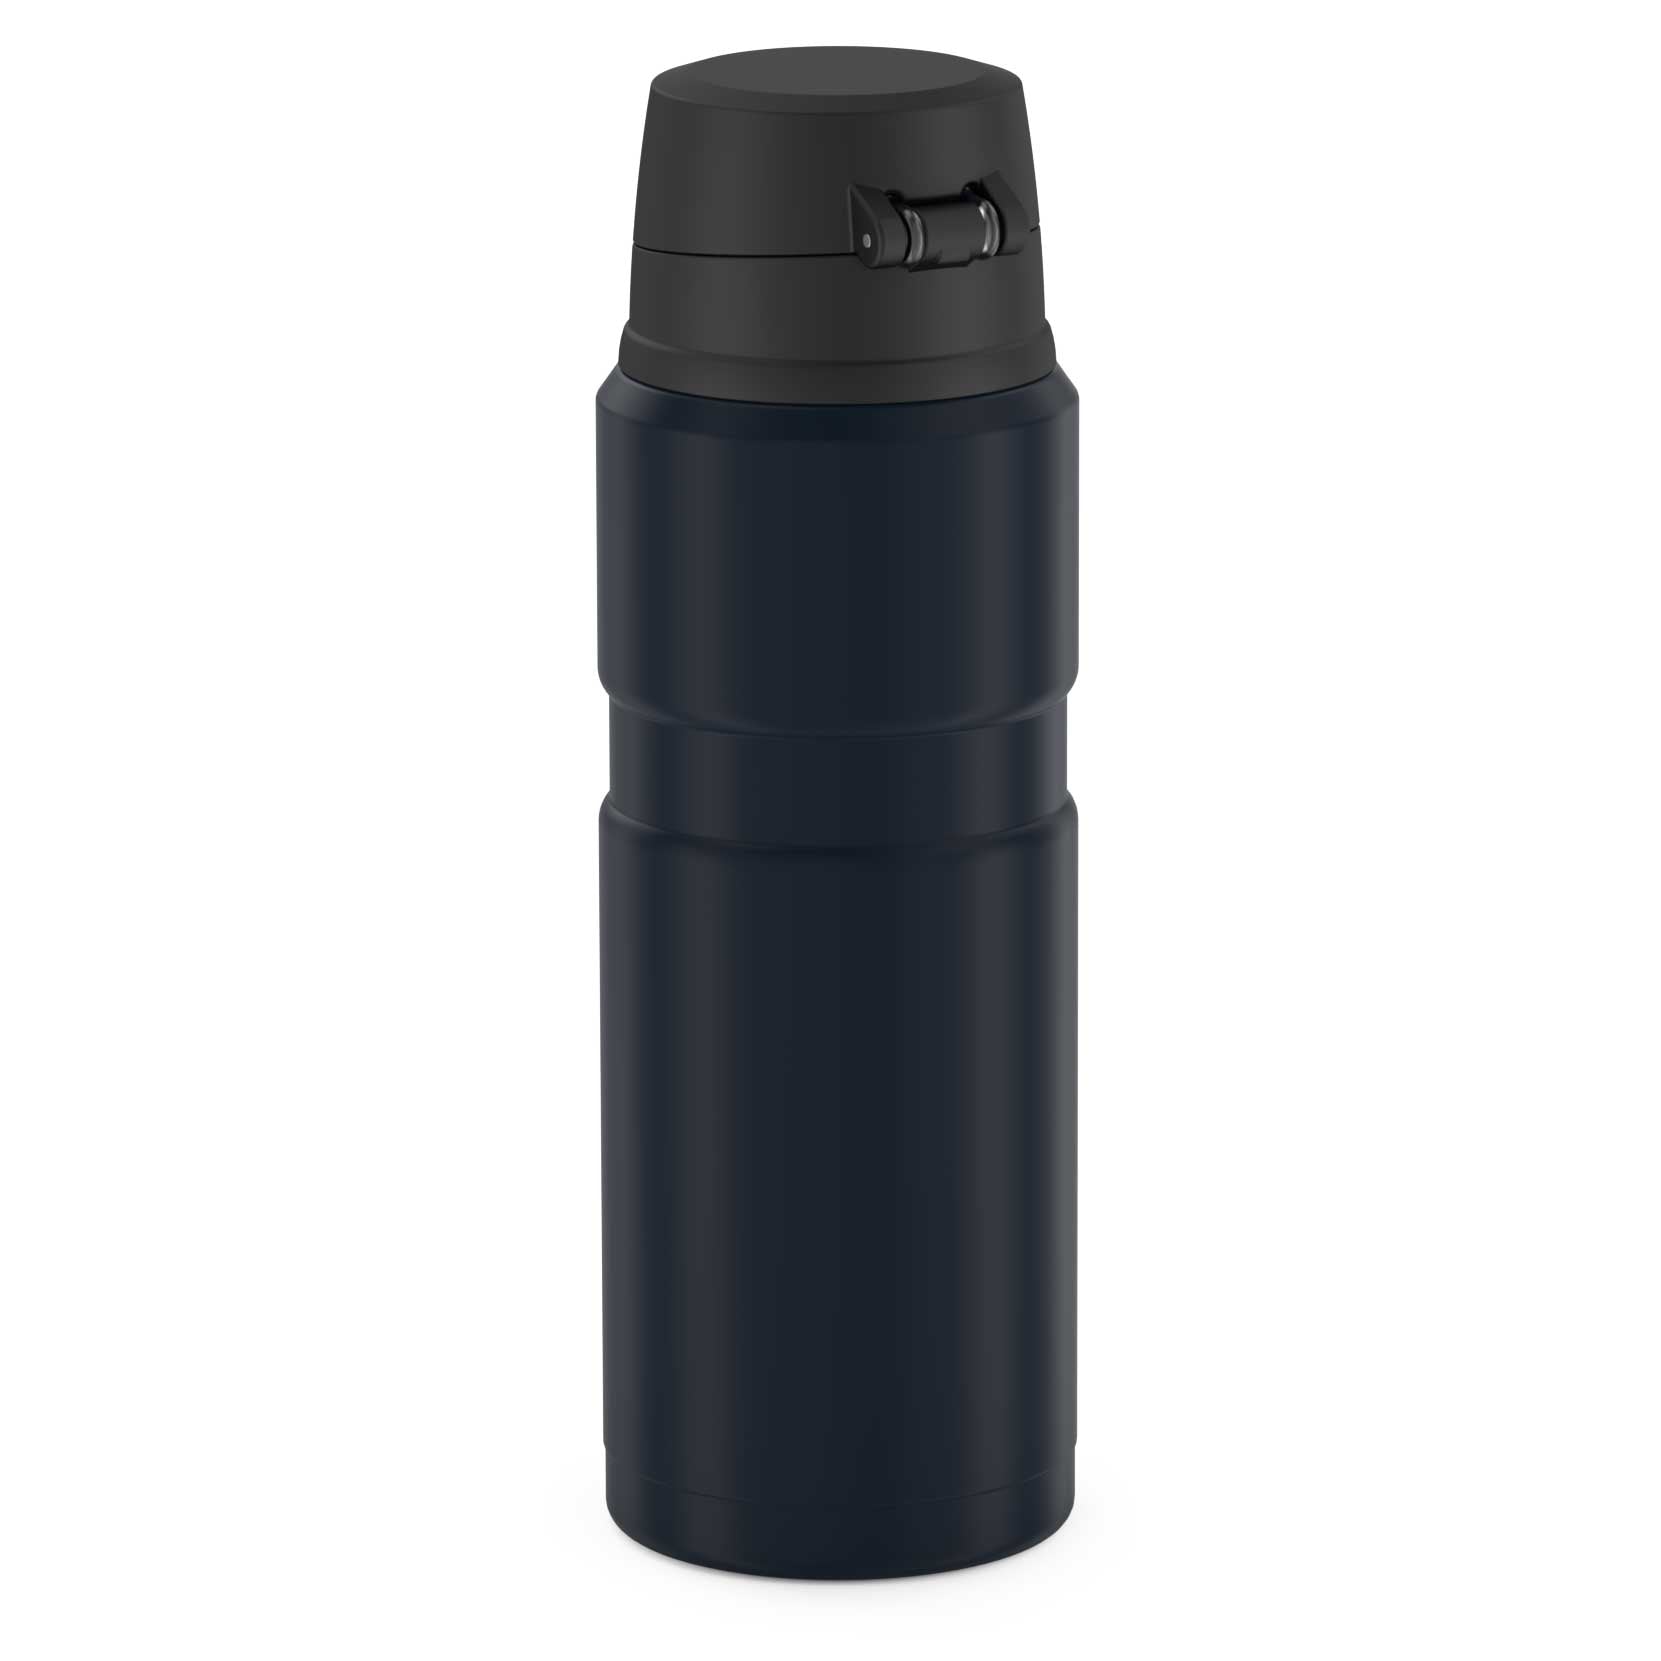 Thermos 24 Oz Vacuum Insulated Direct Drink Beverage Bottle - Matte Blue